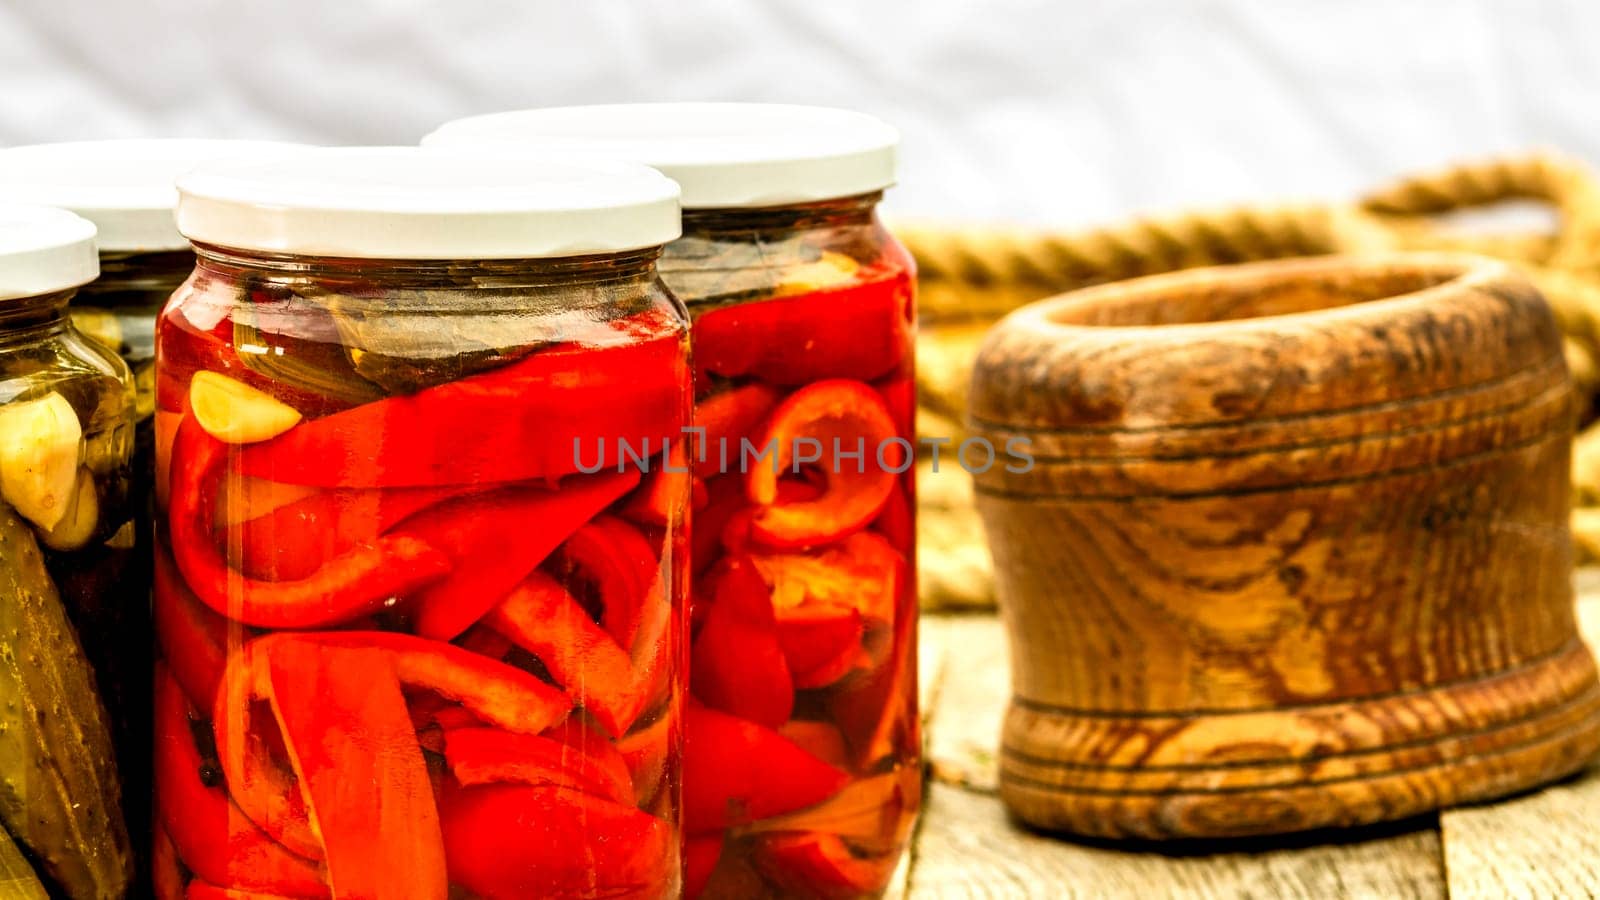 Glass jars with pickled red bell peppers. Preserved food concept, canned vegetables